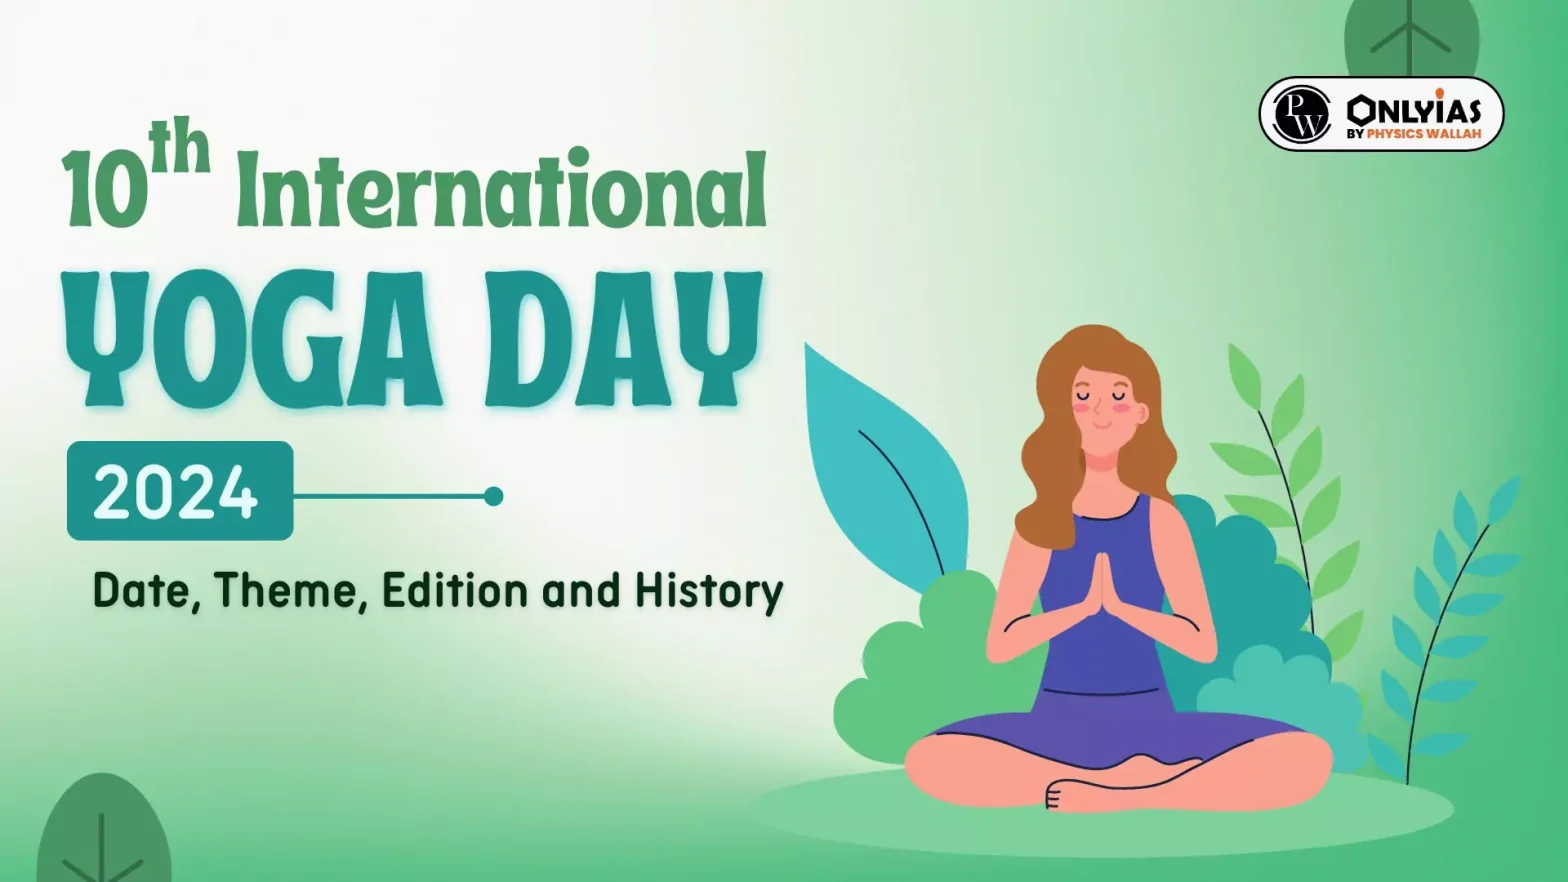 10th International Yoga Day 2024 Date, Theme, Edition, and History